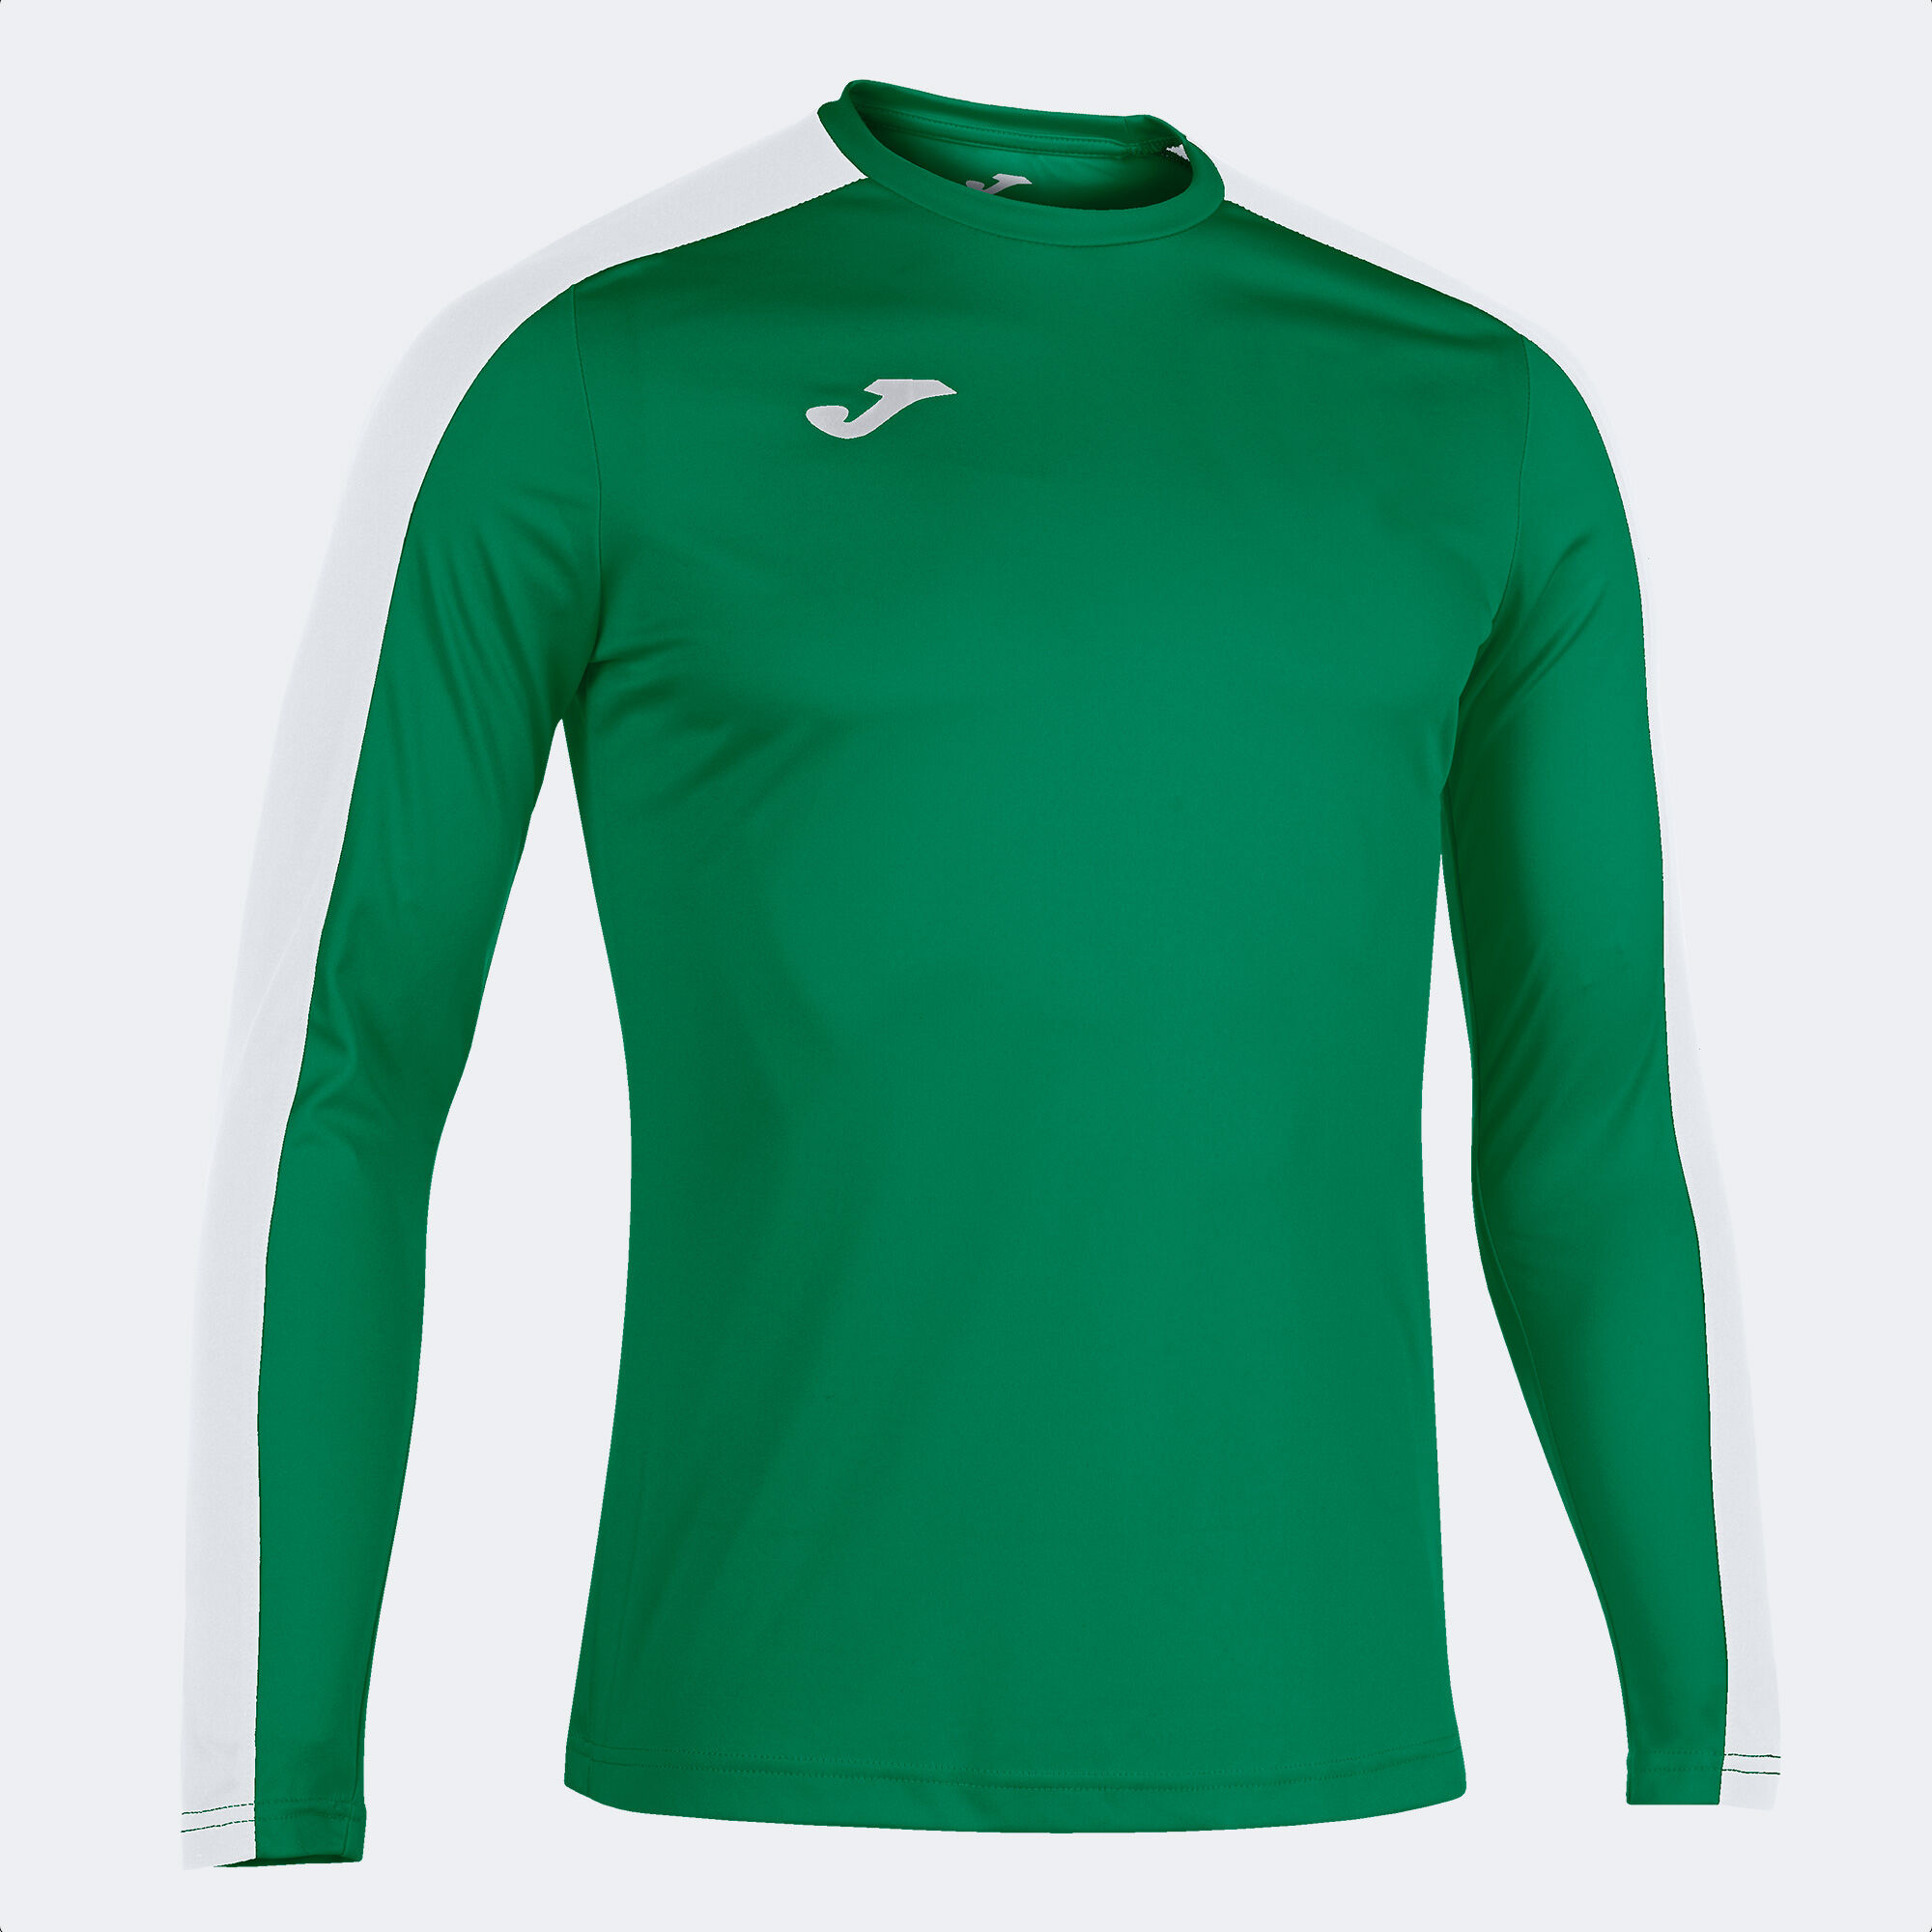 Maillot manches longues homme Academy III vert blanc